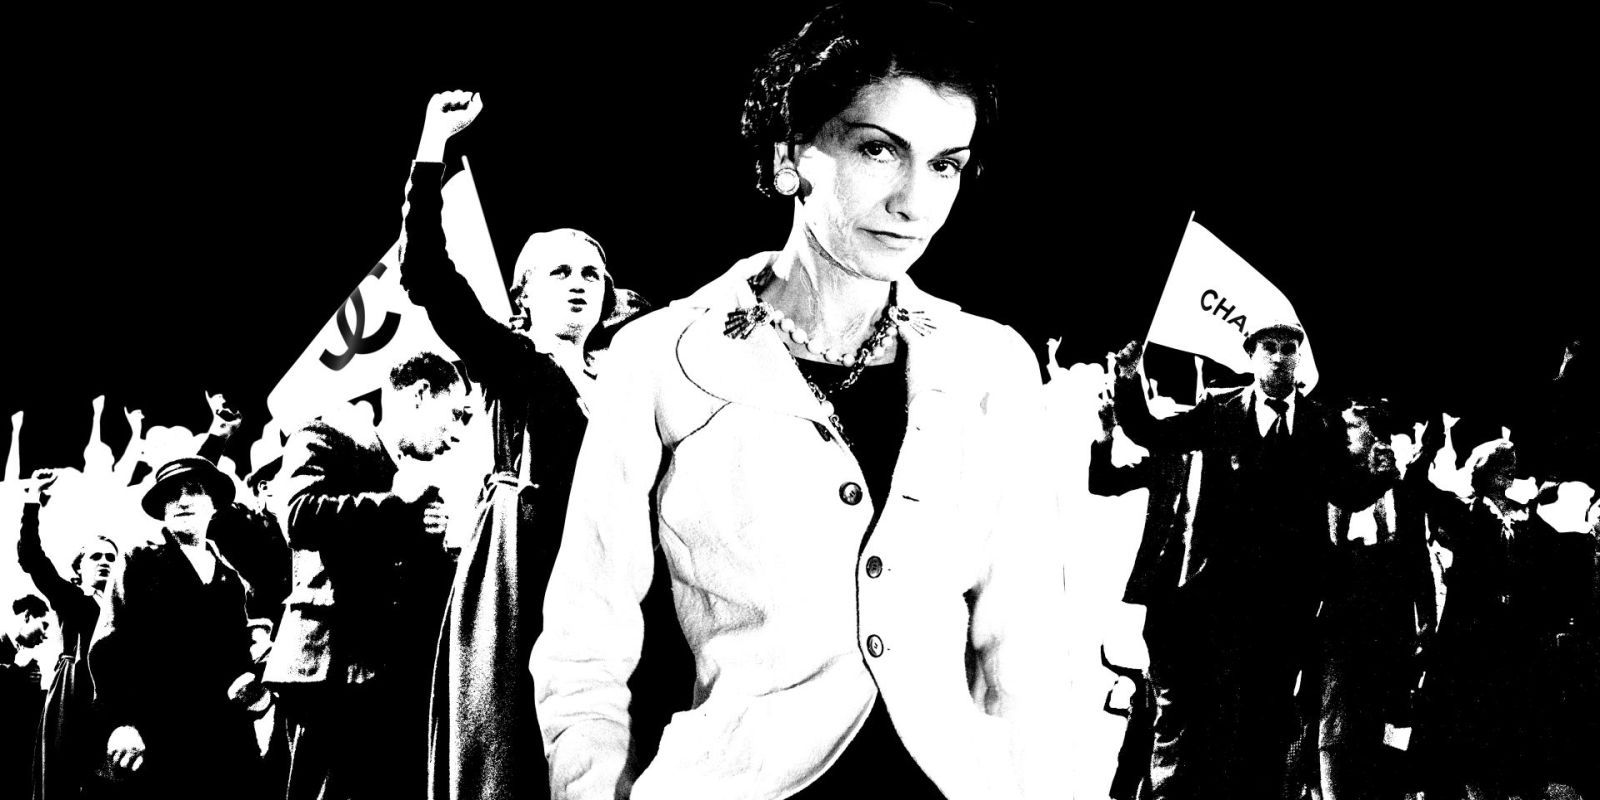 Icons before Instagram: How Coco Chanel changed the course of history